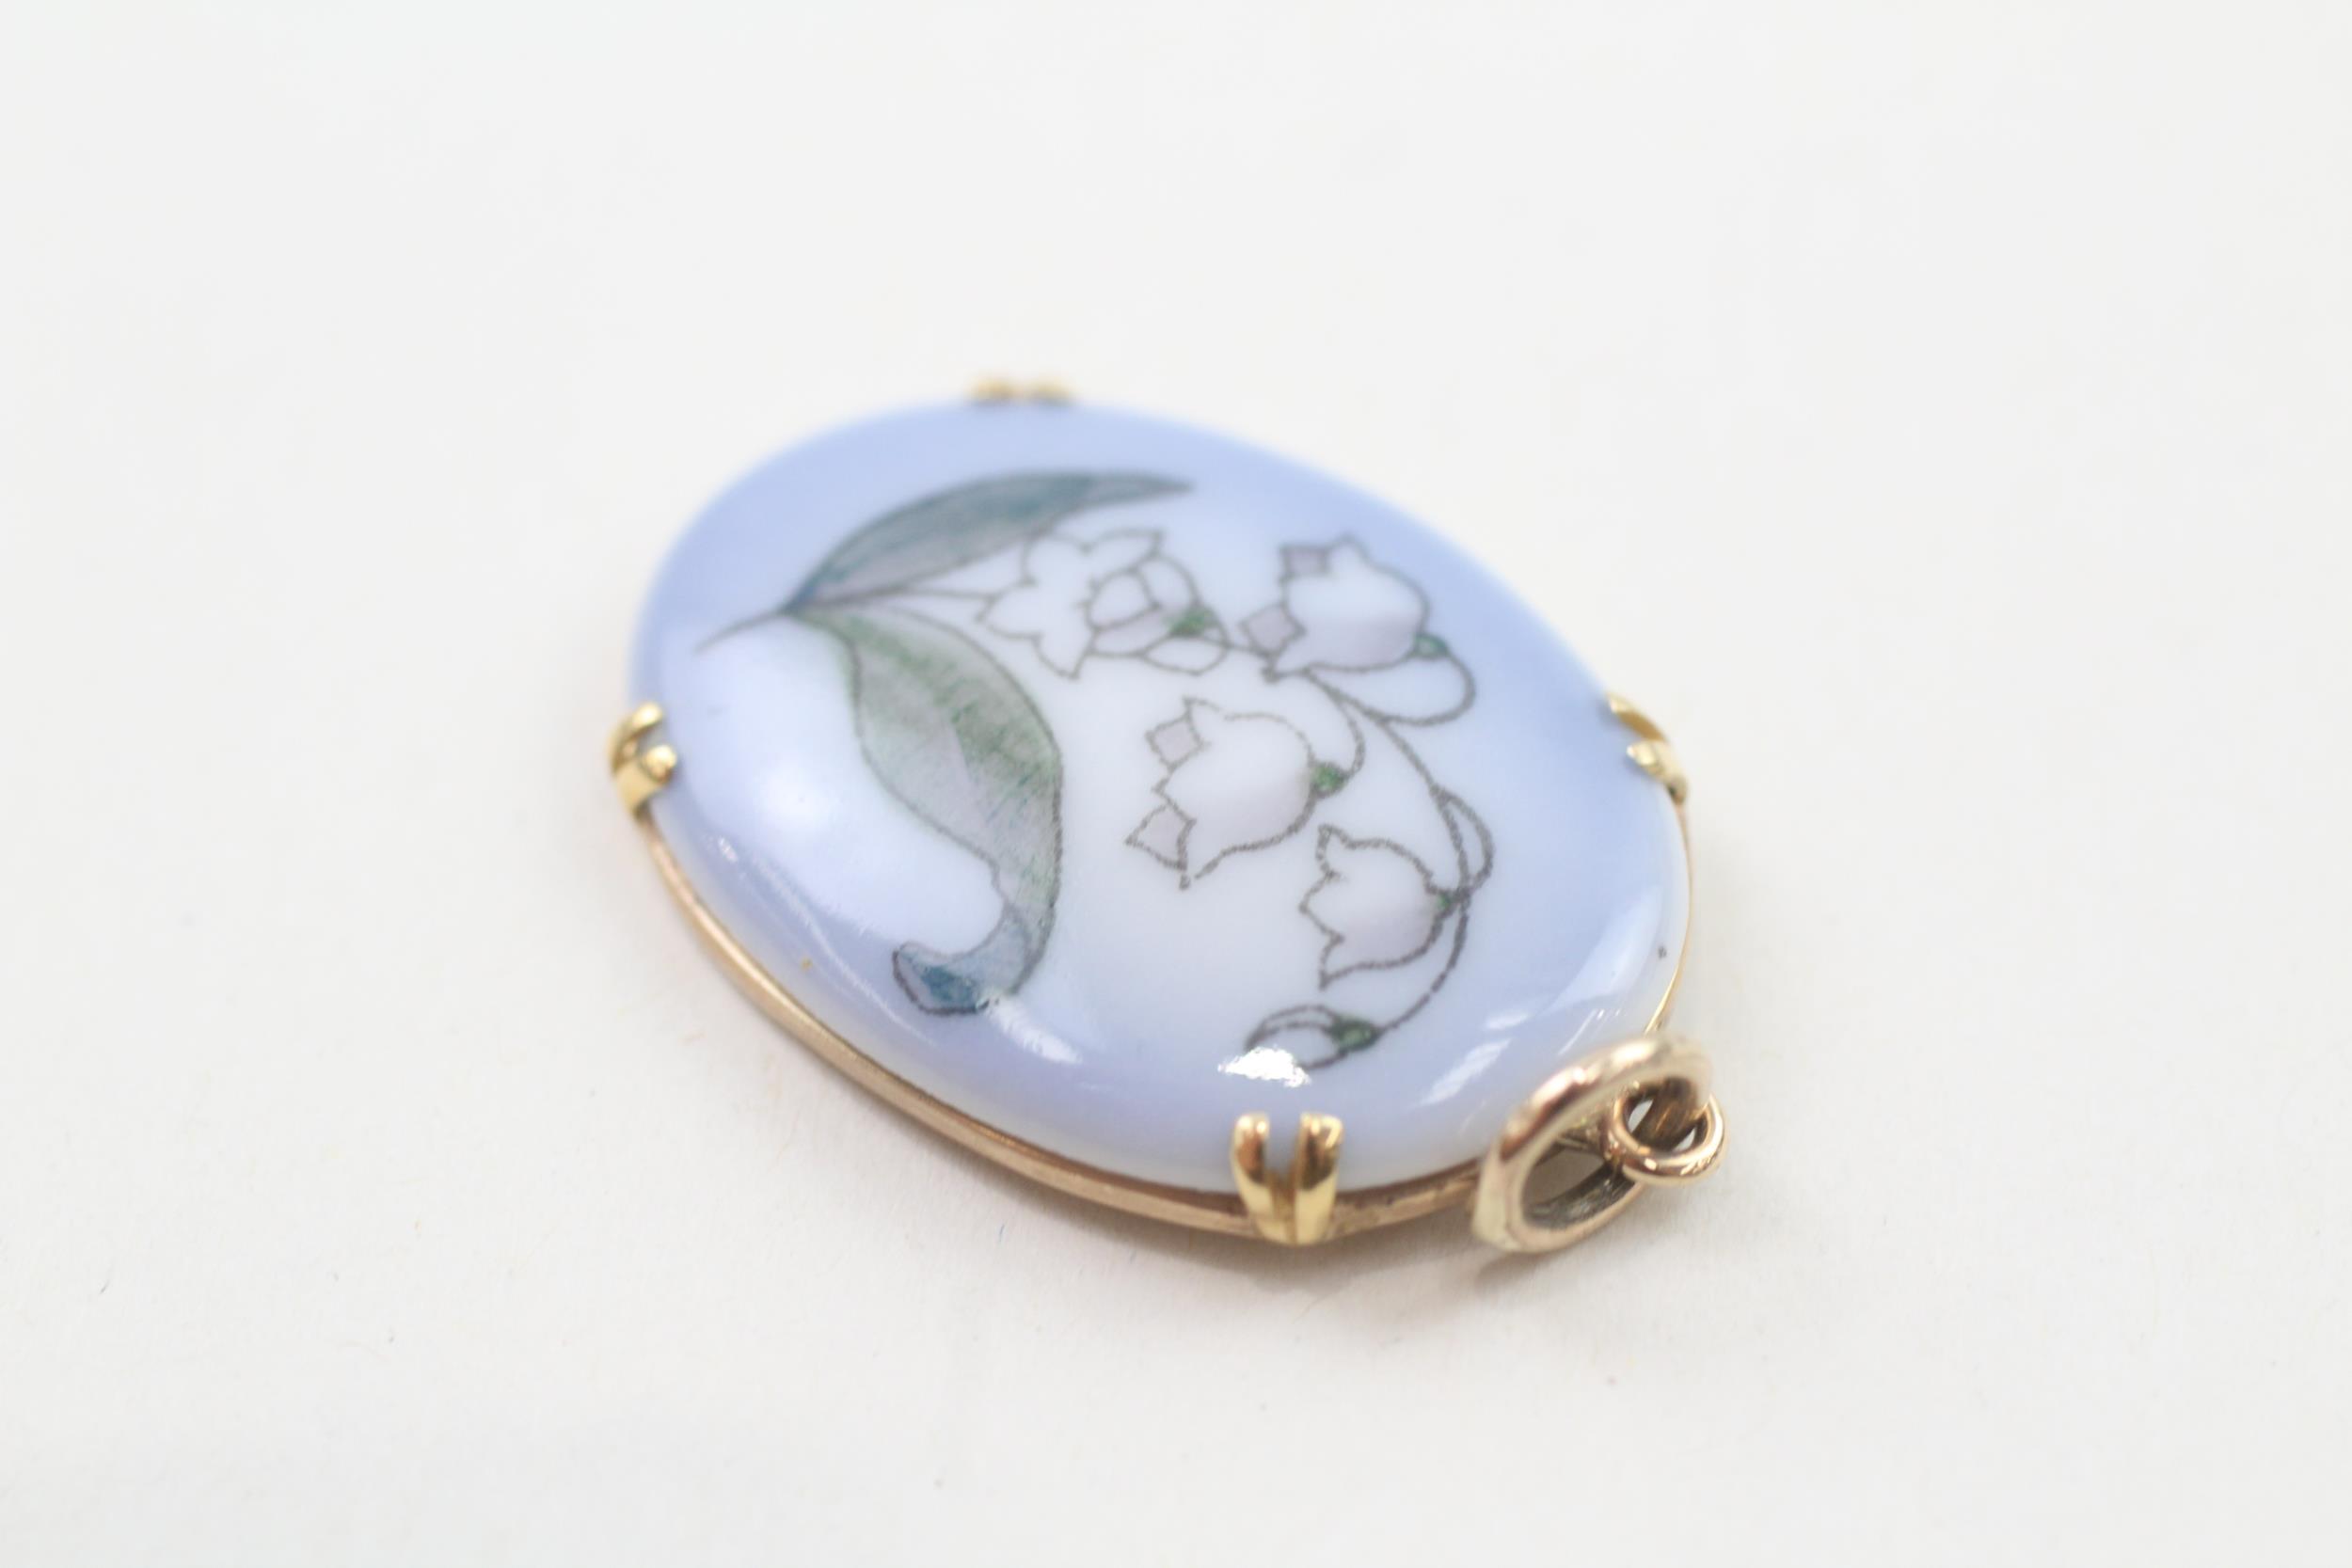 9ct gold lilly of the valley, danish porcelain pendant by Bing & Grondahl (3.2g) - Image 3 of 5